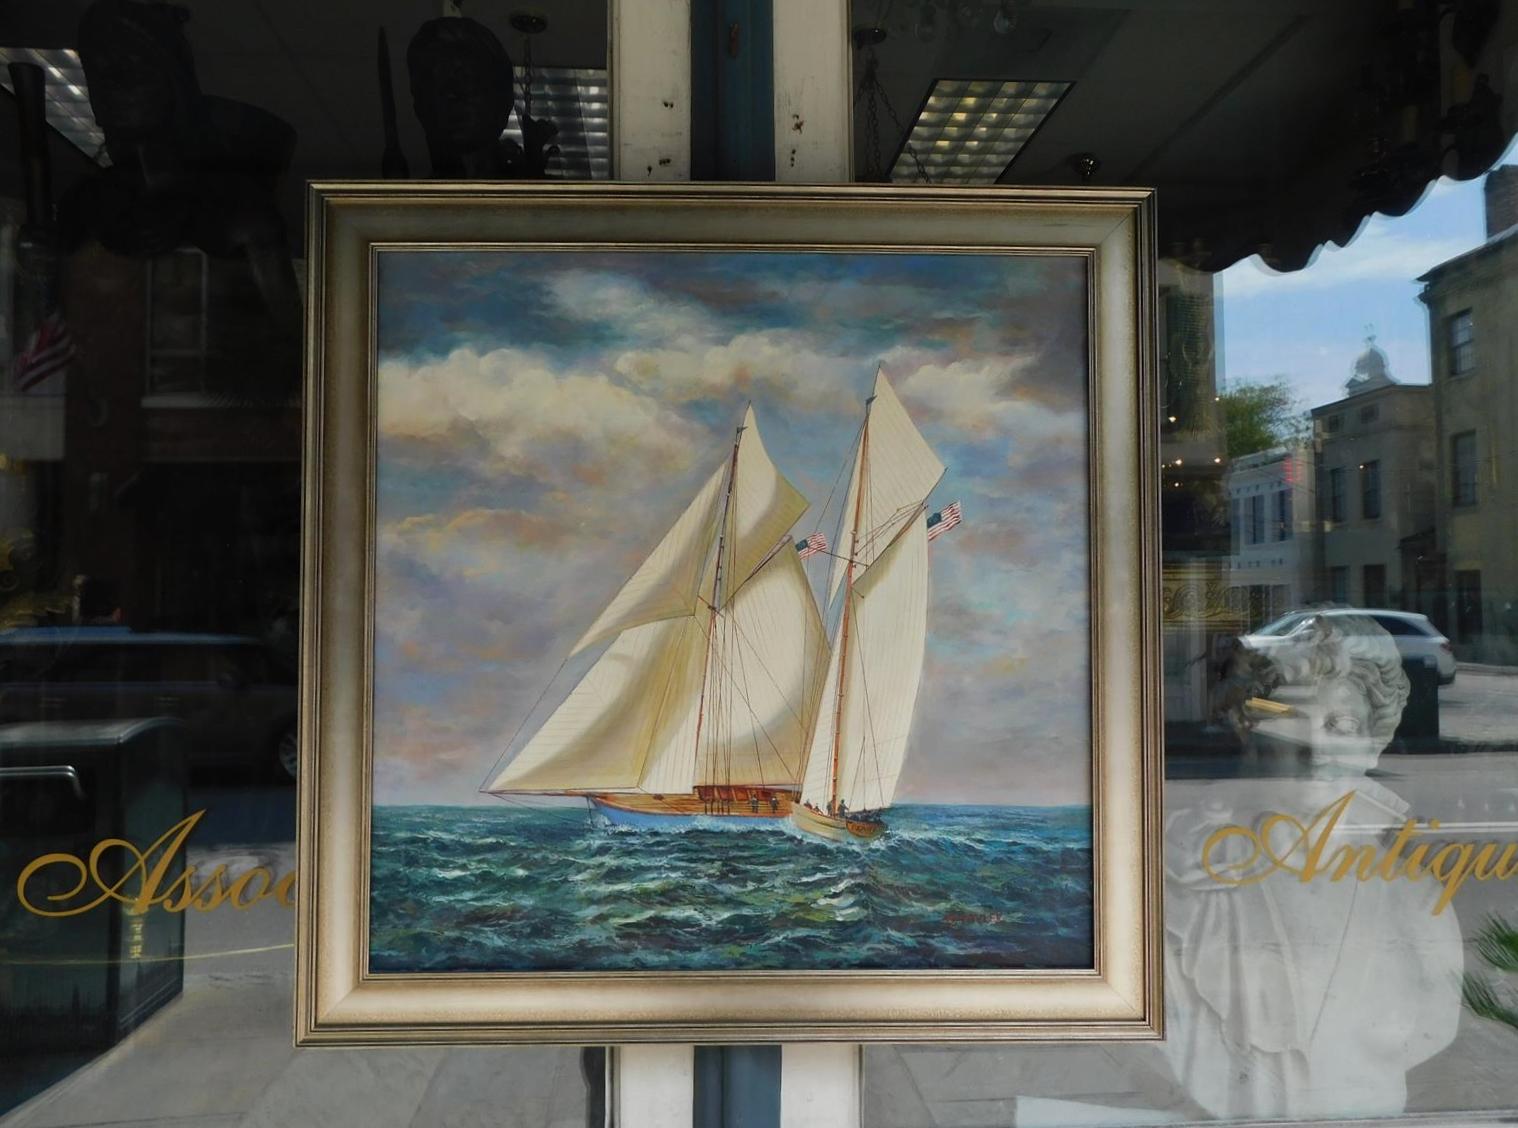 American nautical oil on canvas of single masted schooner yacht under full sail with American flags, and crews on deck while second vessel victory is approaching.  Painting is mounted in the original silver gilt frame, Early 20th century. Signed D.